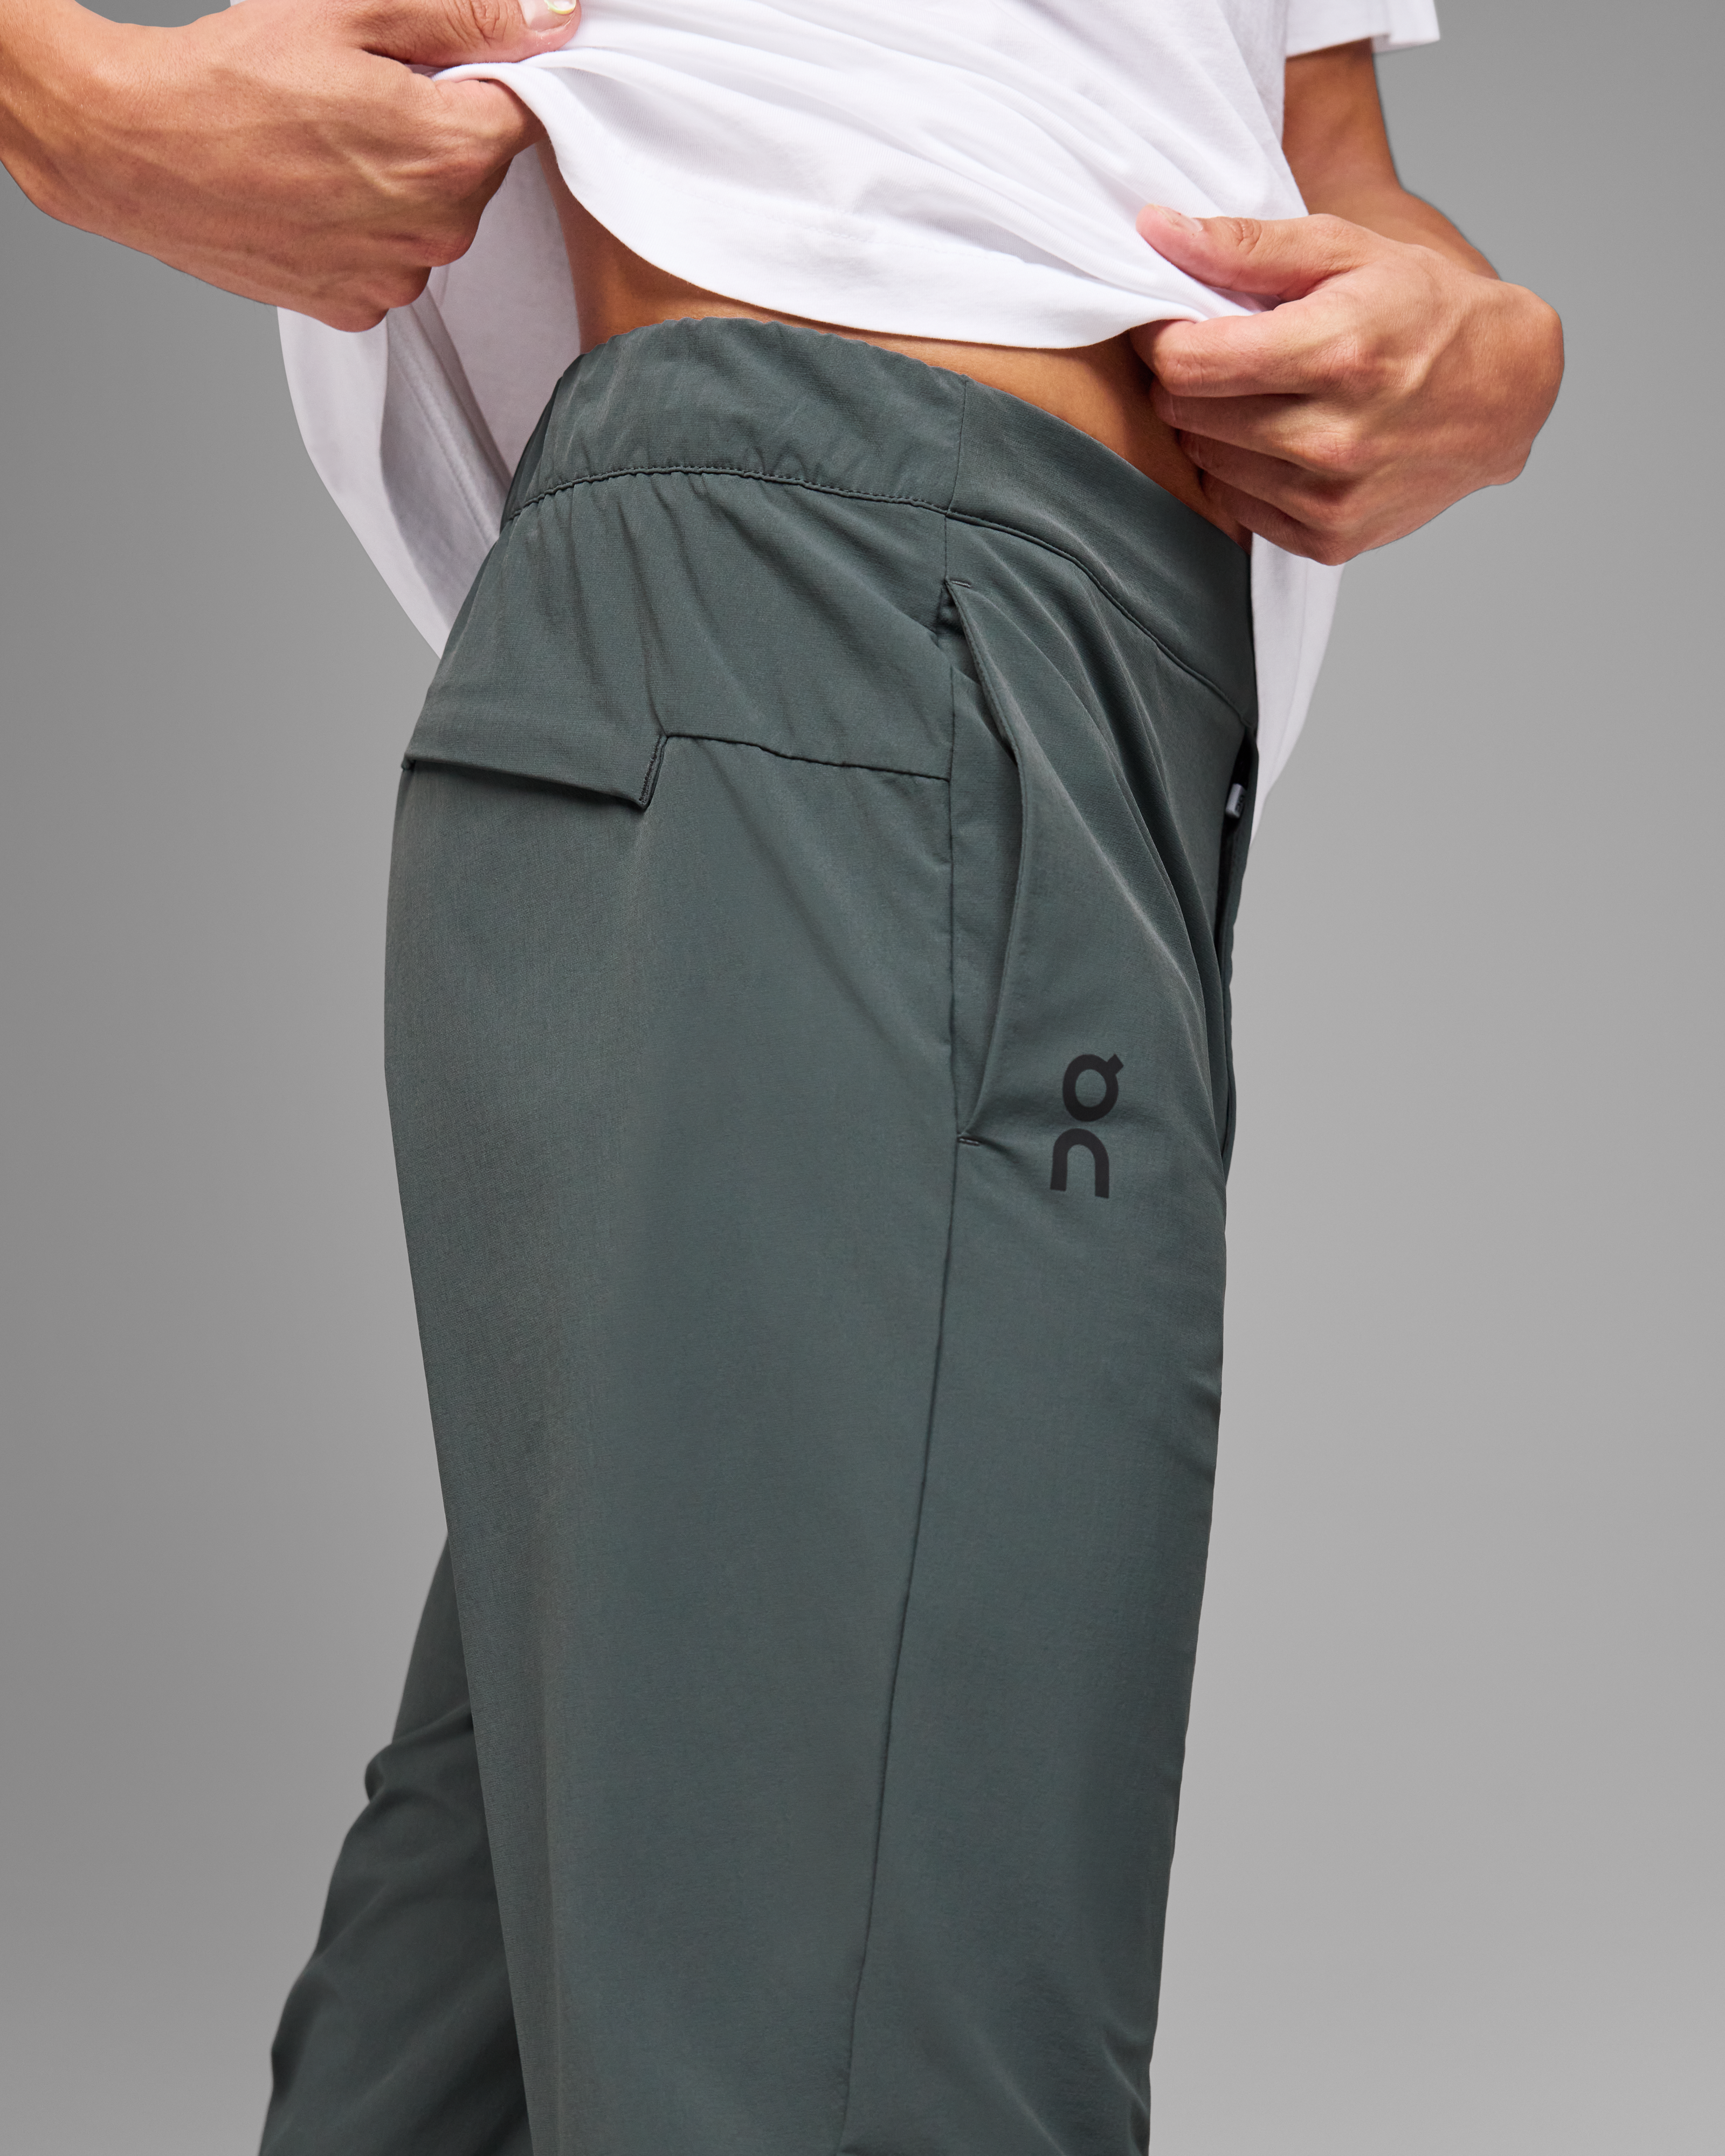 Onvous Everyday Men's Pants for Active, Casual, and Work, Versatile &  Comfortable